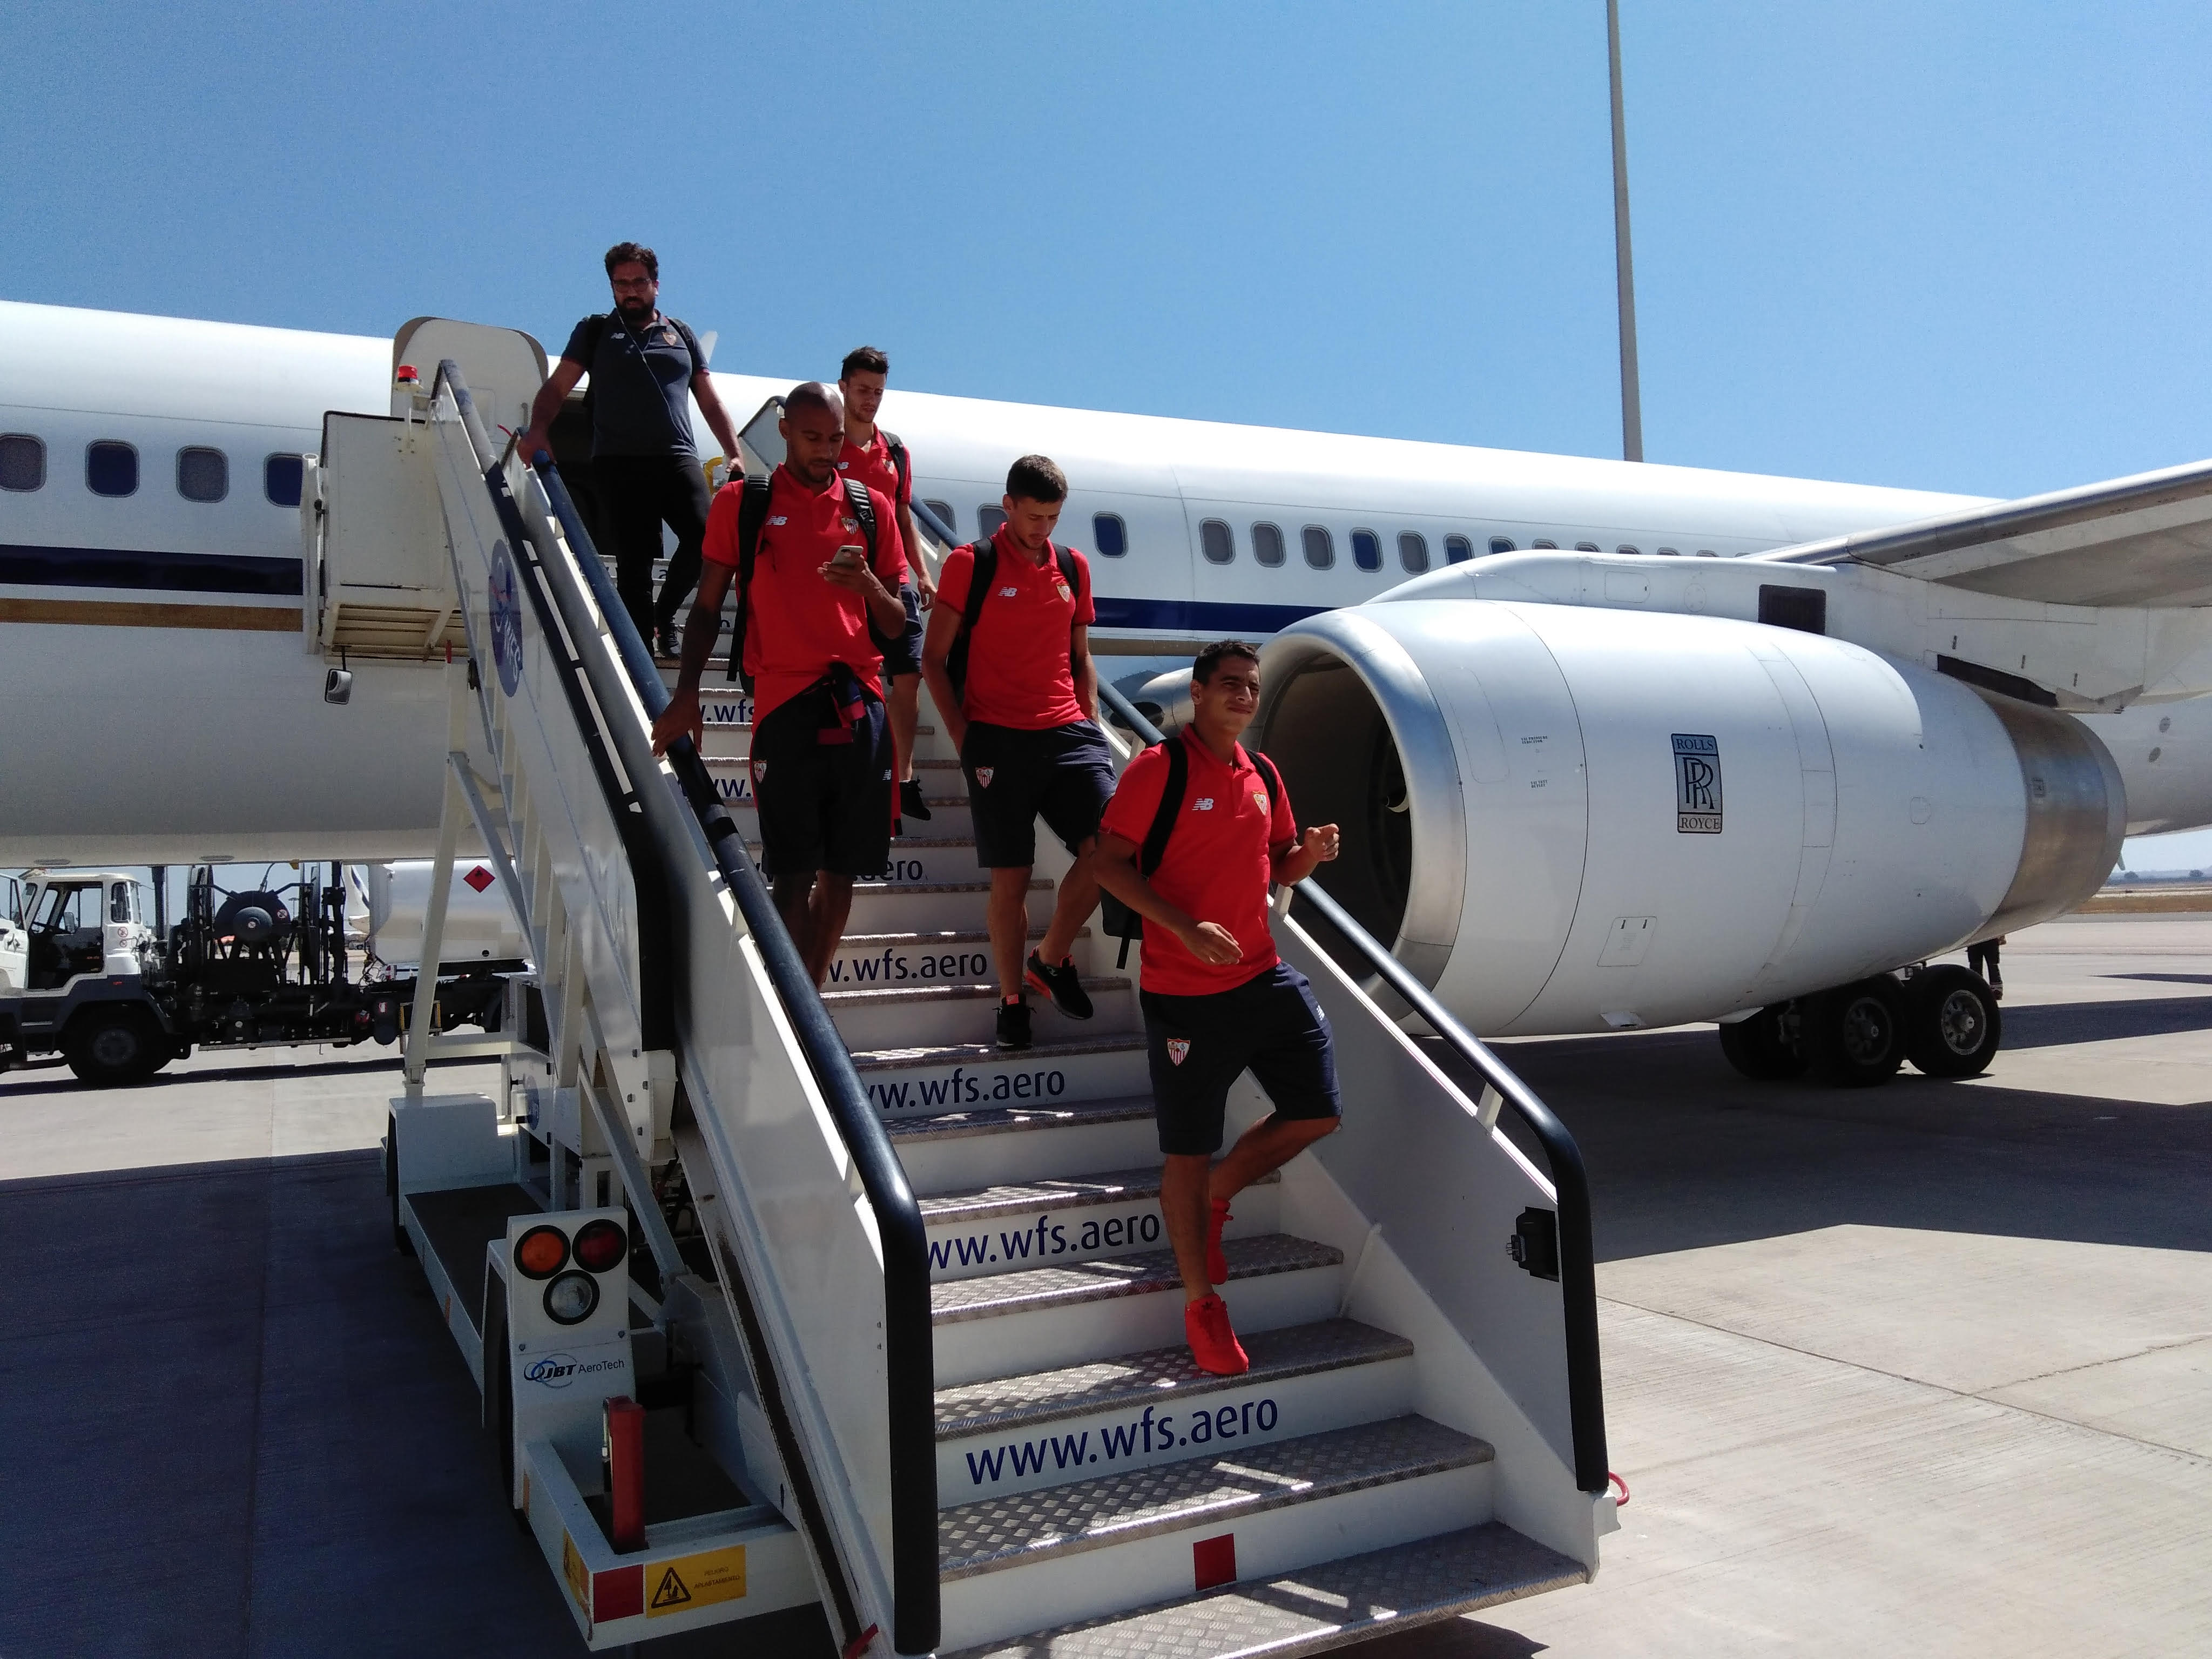 The team get off the plane at San Pablo